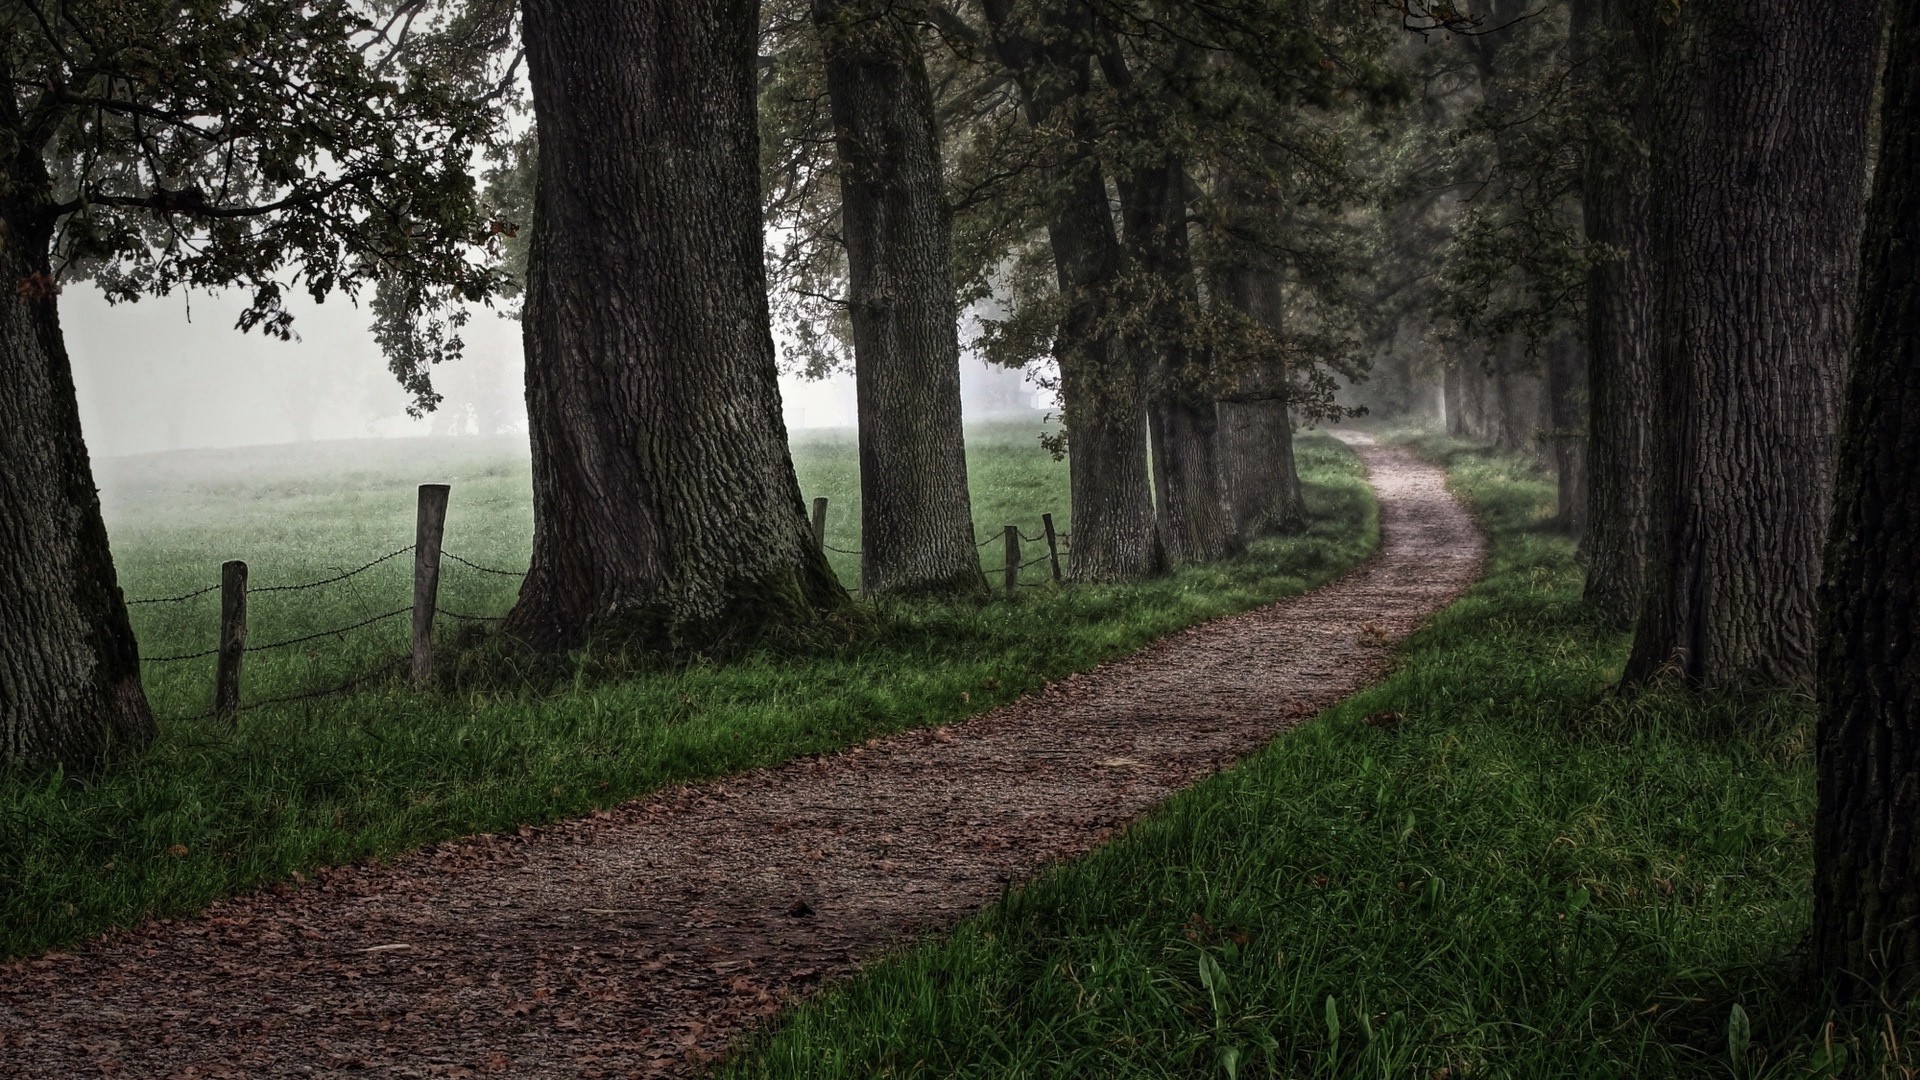 1920x1080 wallpapers: road, grass, trees, forest (image)